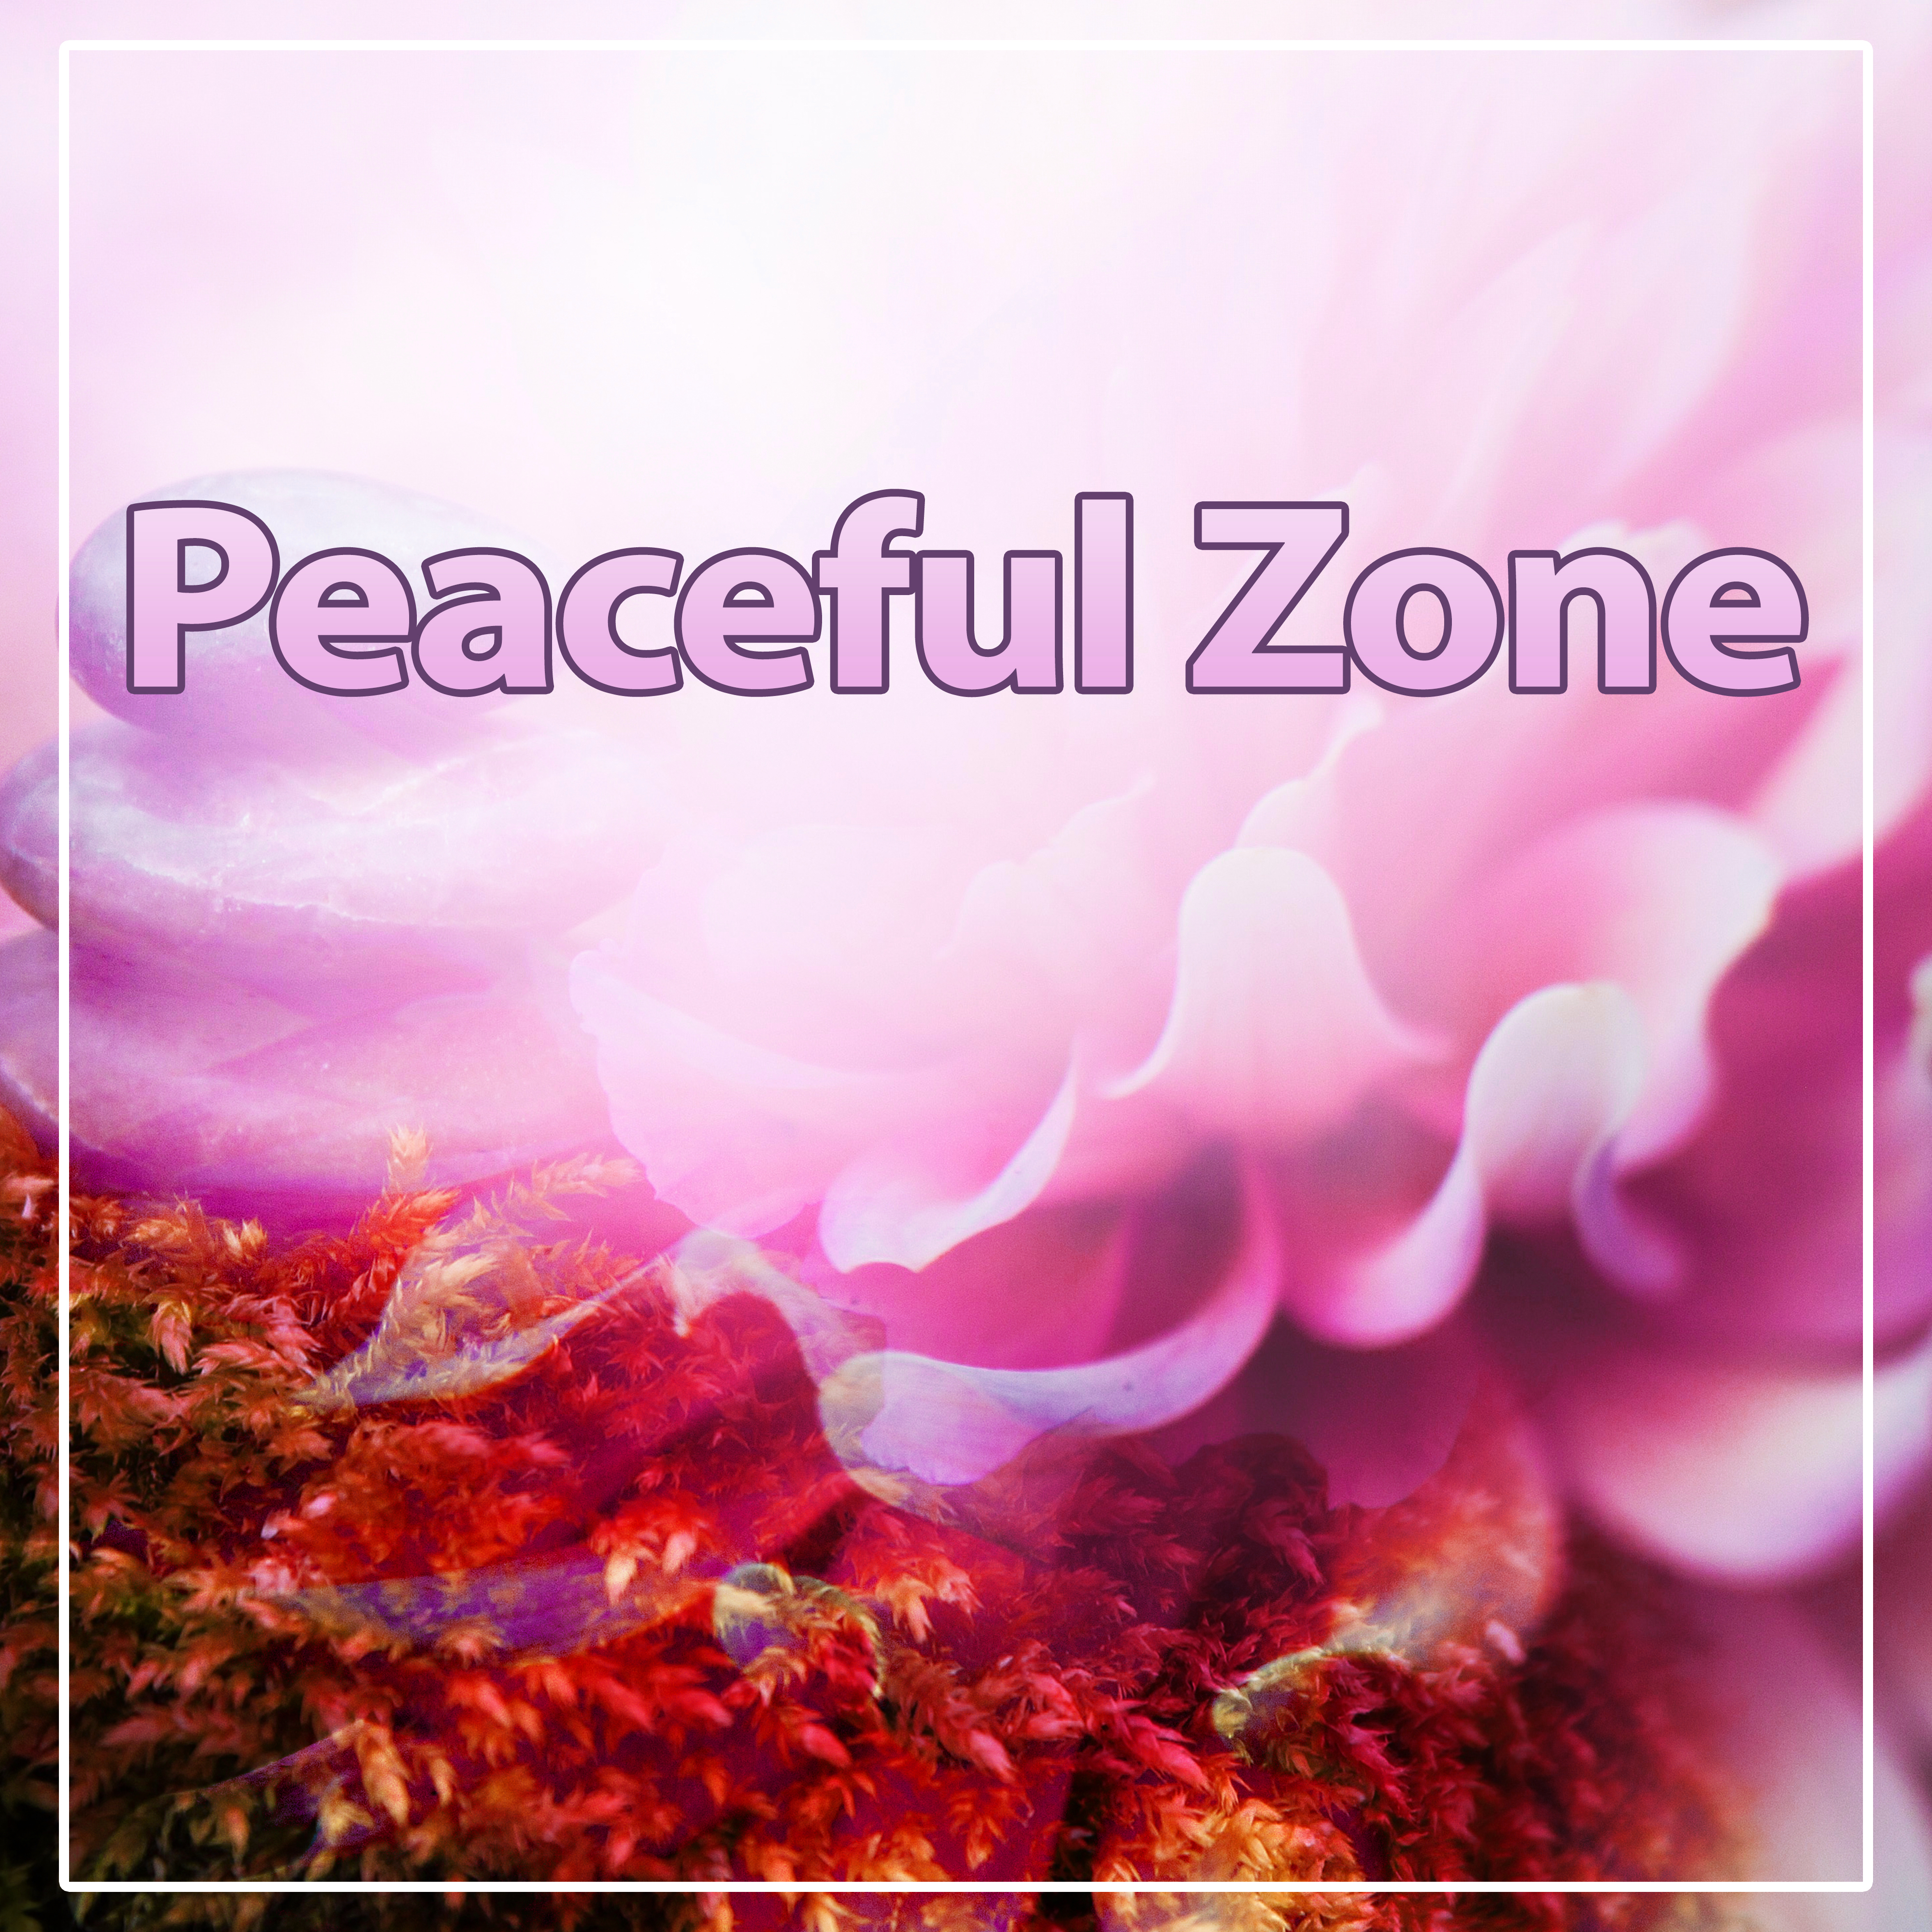 Peaceful Zone – Therapy Relaxation Massage, Spa Lounge, Calm Sounds, Spa Relaxation